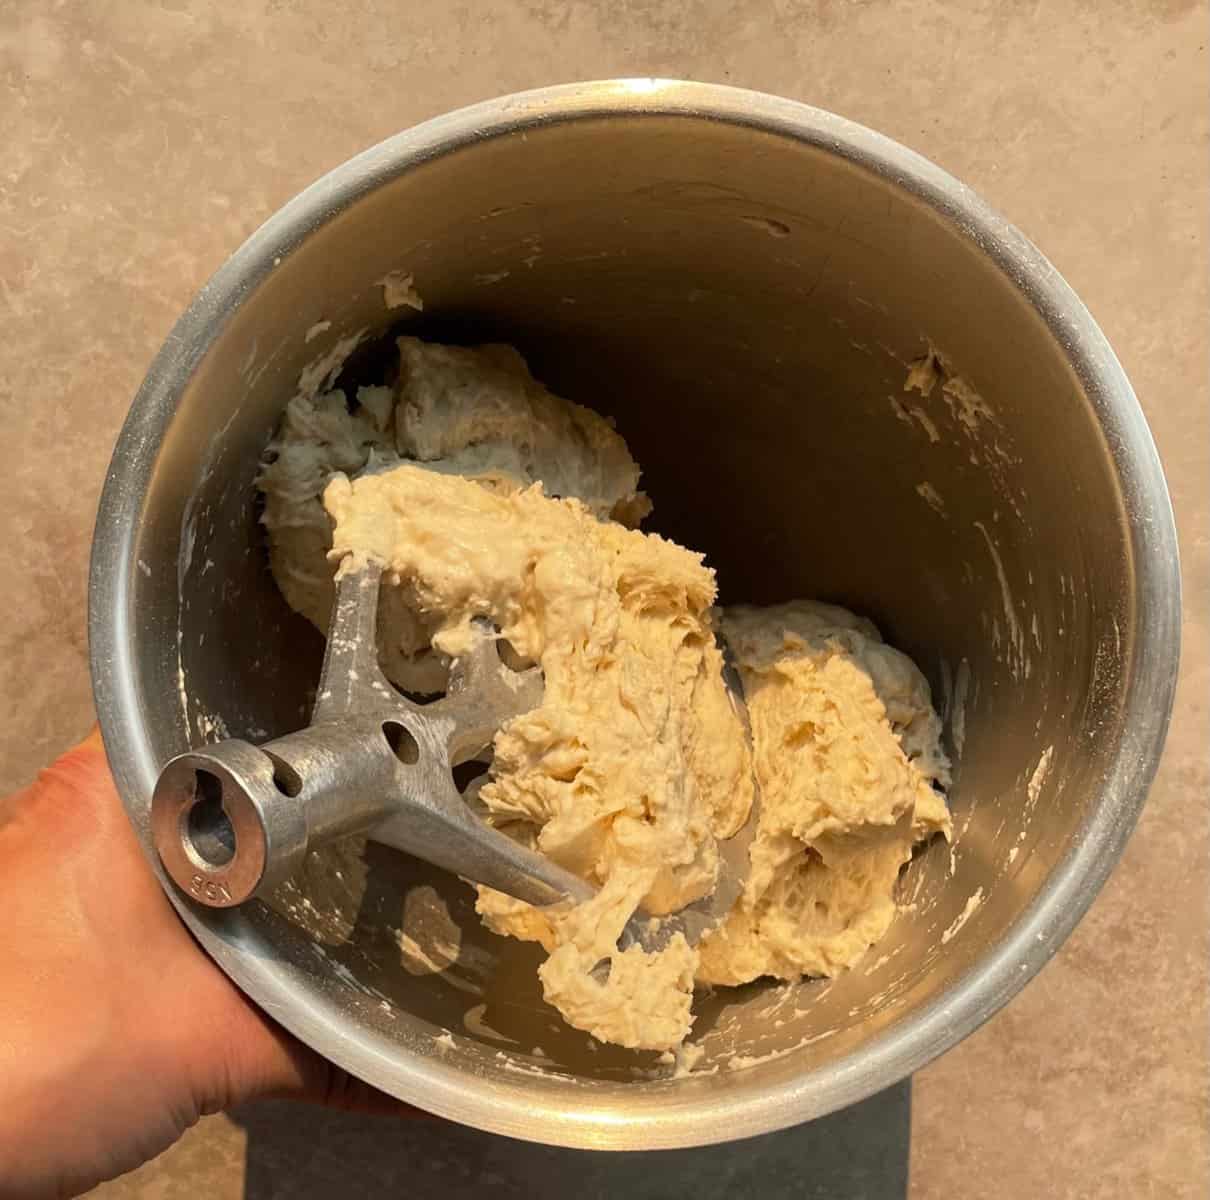 partially mixed dough in a mixing bowl and paddle.